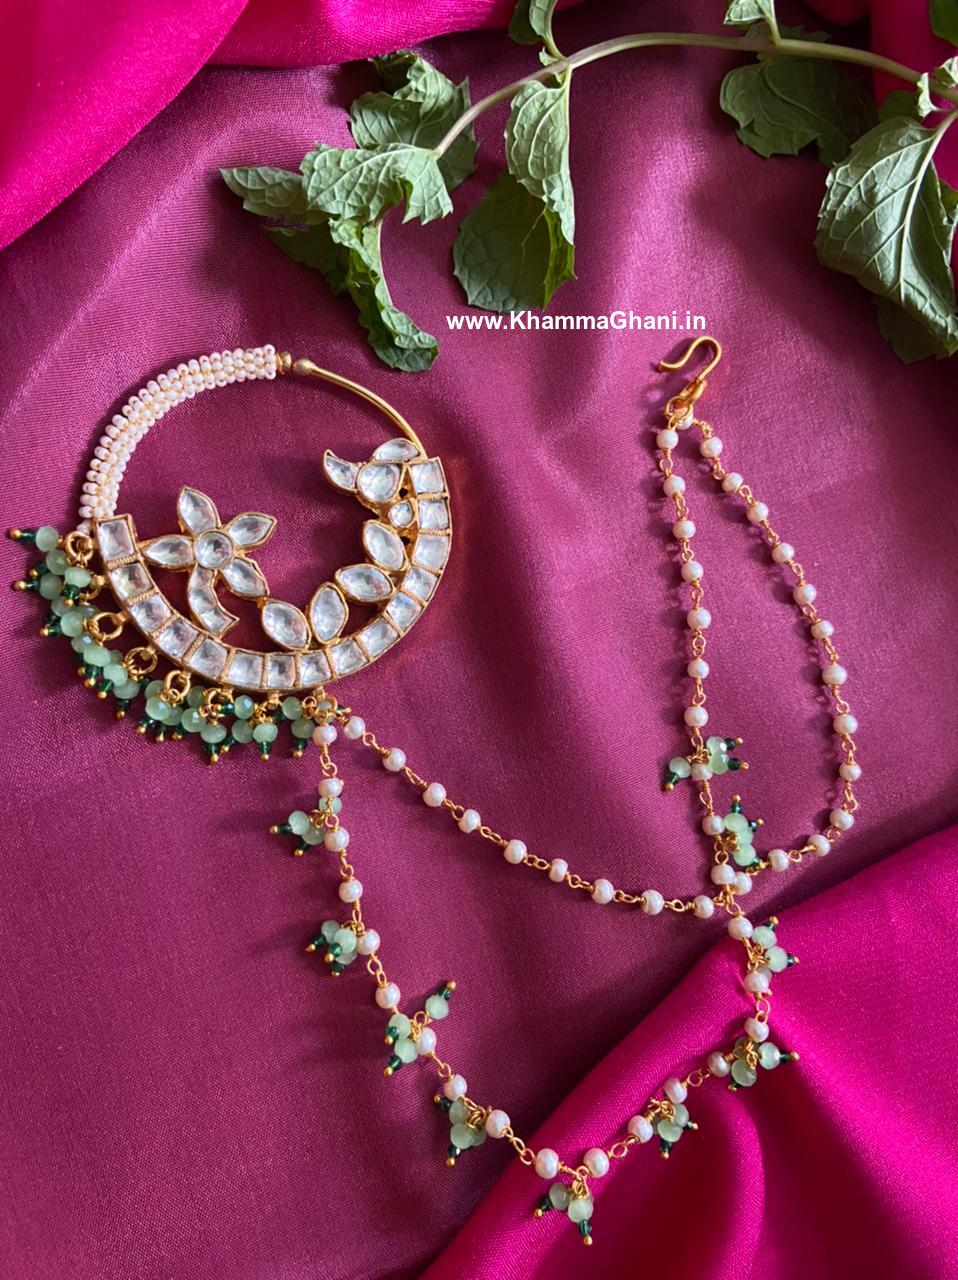 Jewellery Design: The Best Gift on This Diwali